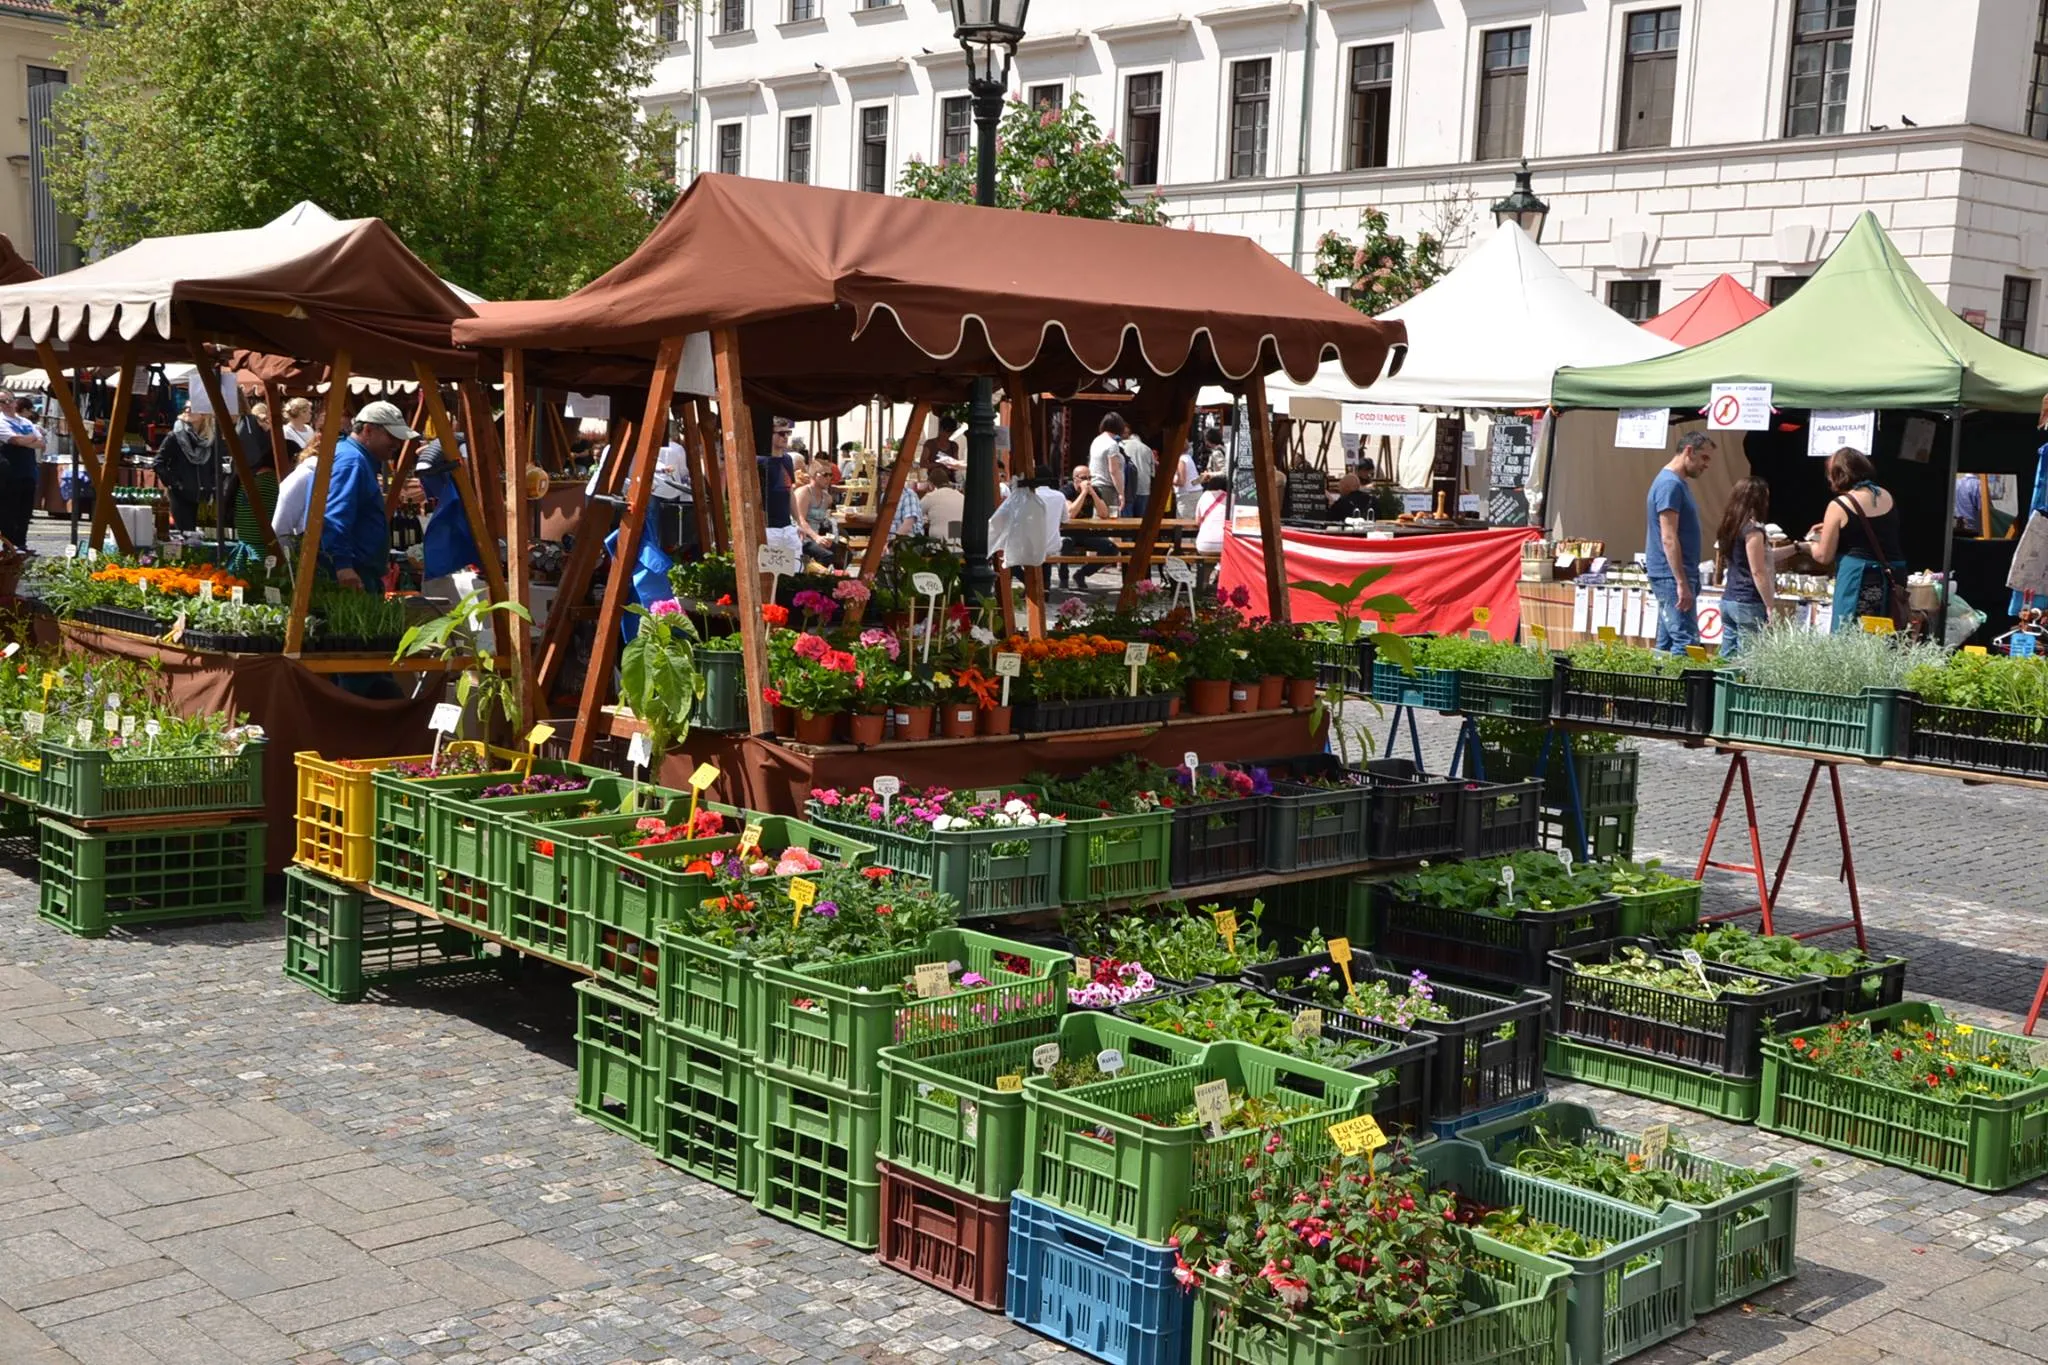 Farmer’s Markets in Czech Republic, europe | Organic Food,Groceries,Fruit & Vegetable,Herbs - Rated 4.6